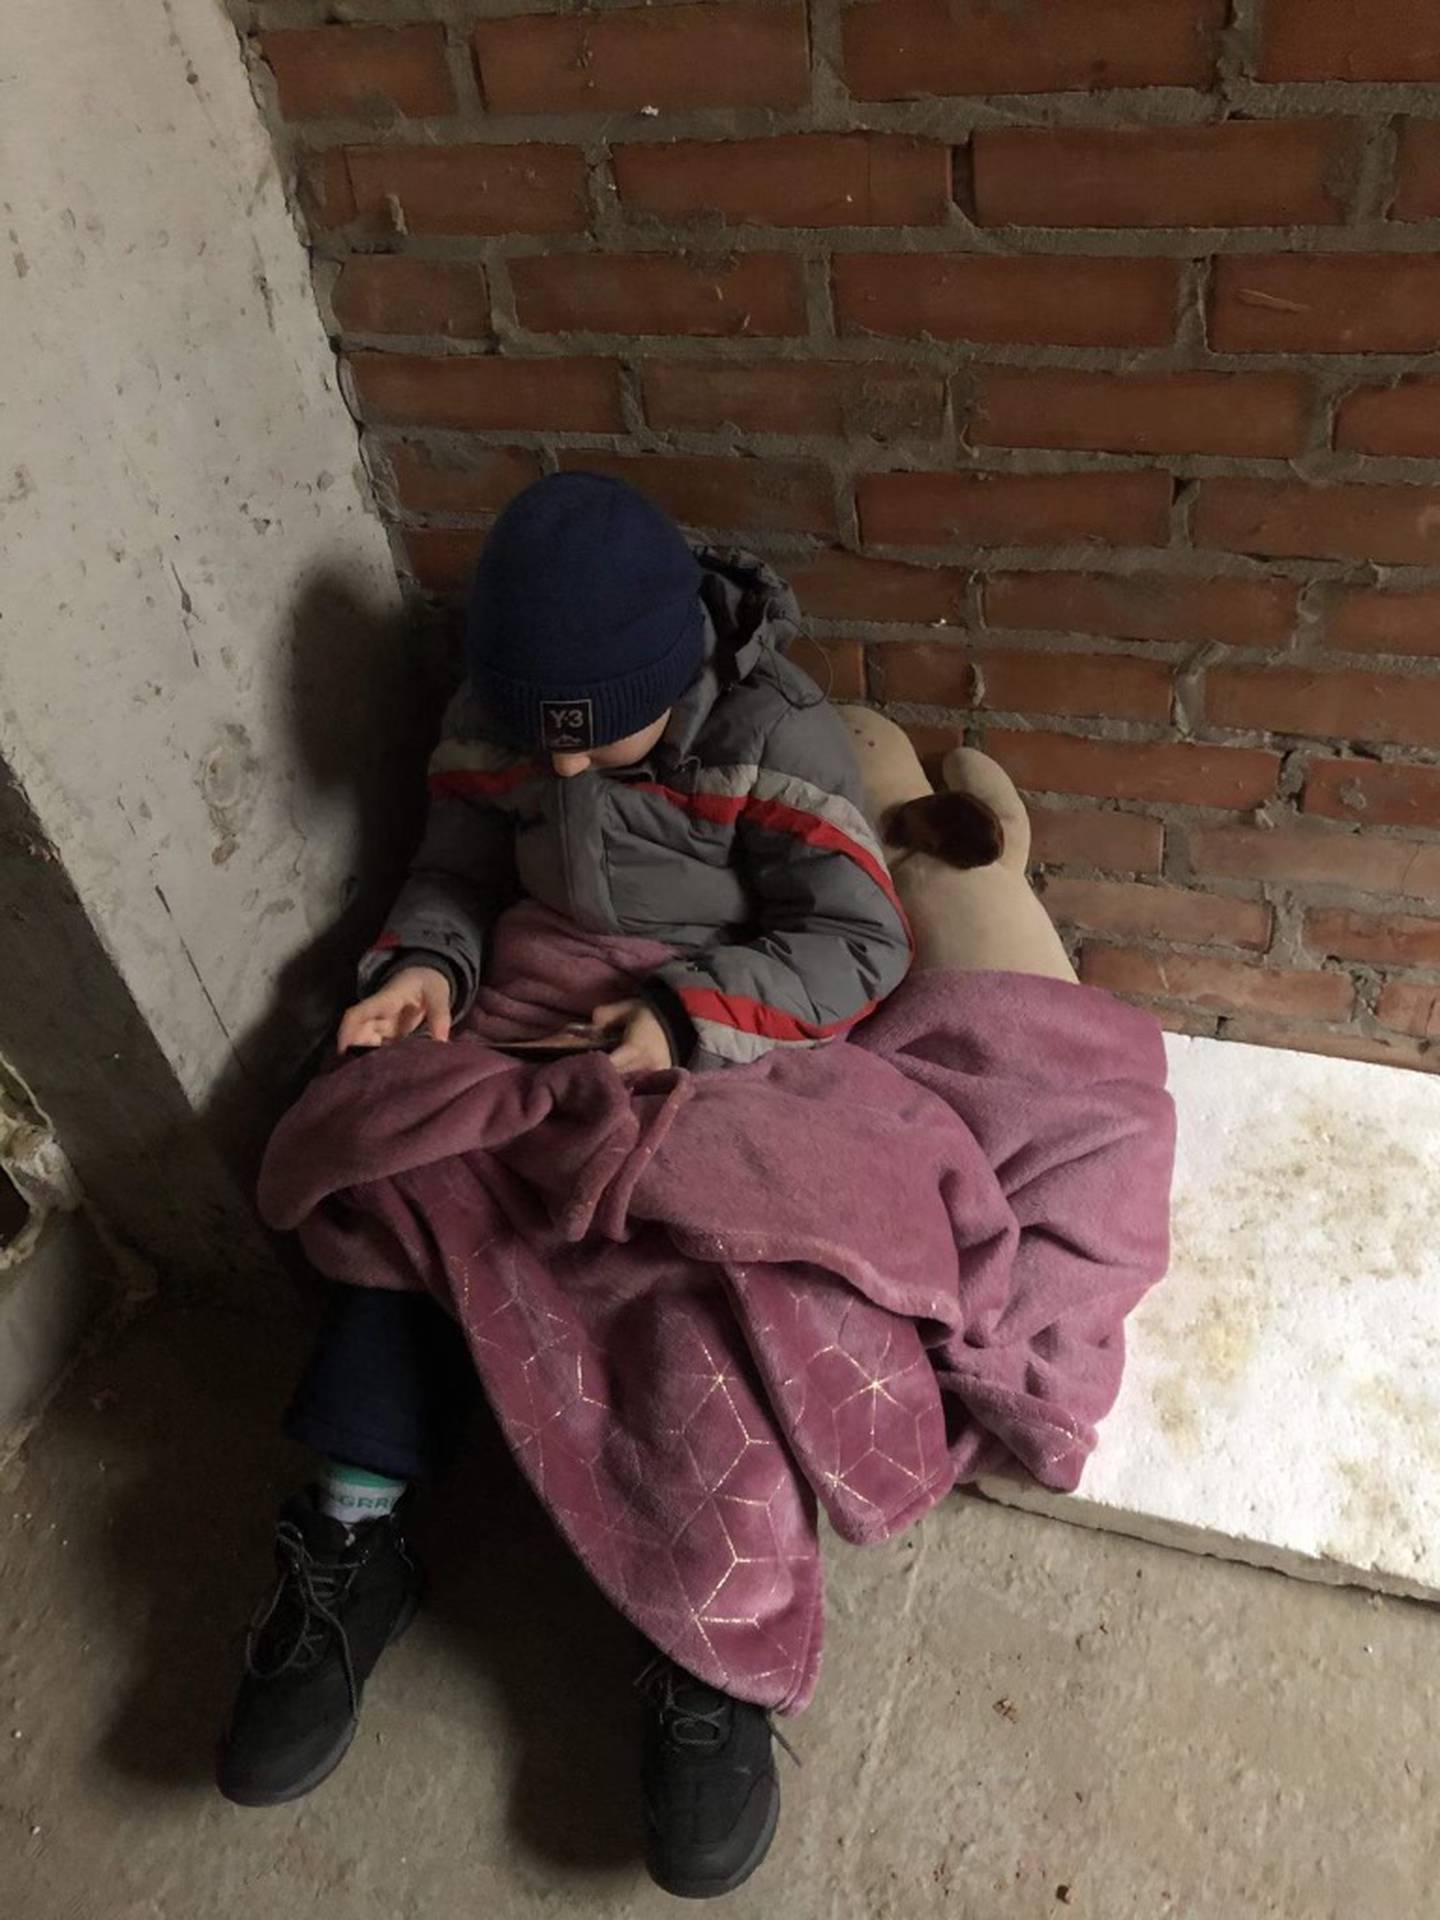 Vova Avramenko, 7, sits huddled with a blanket and a stuffed animal in a Kyiv bomb shelter during the Russian invasion of Ukraine on Feb. 24.